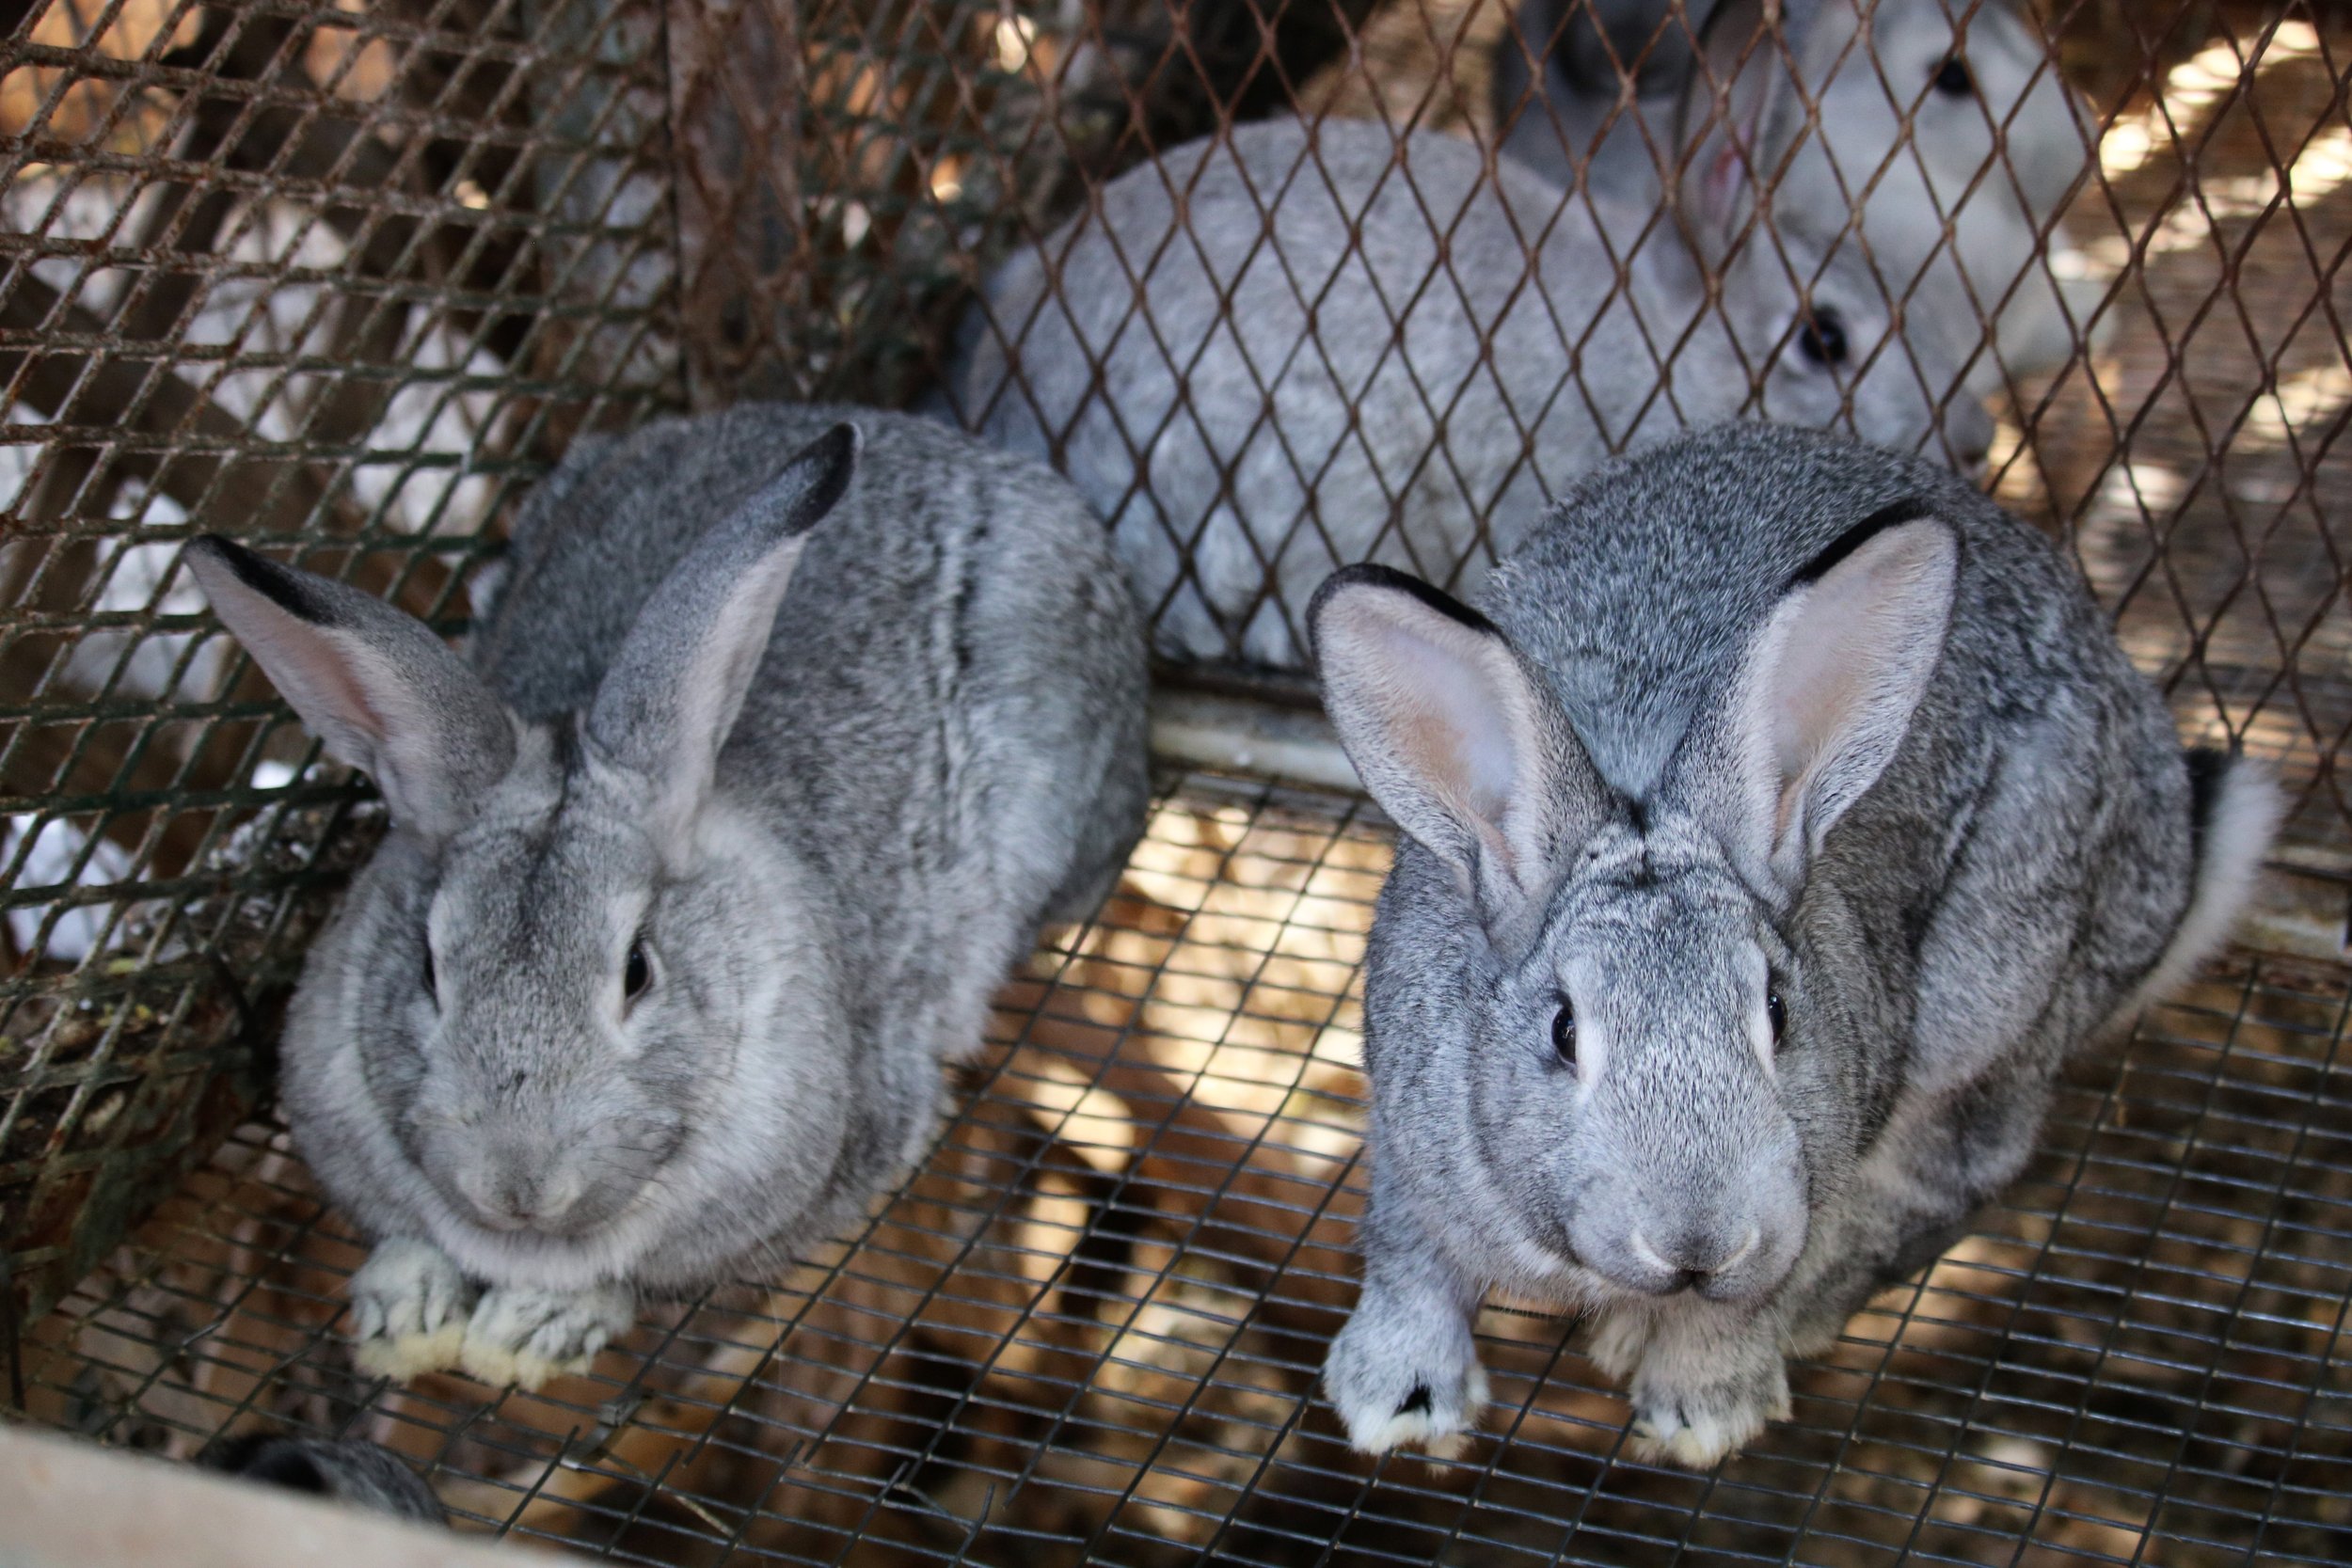 Arizona definitely is a unique place to raise meat rabbits. The hot summers make outdoor rabbit husbandry difficult, but not impossible.